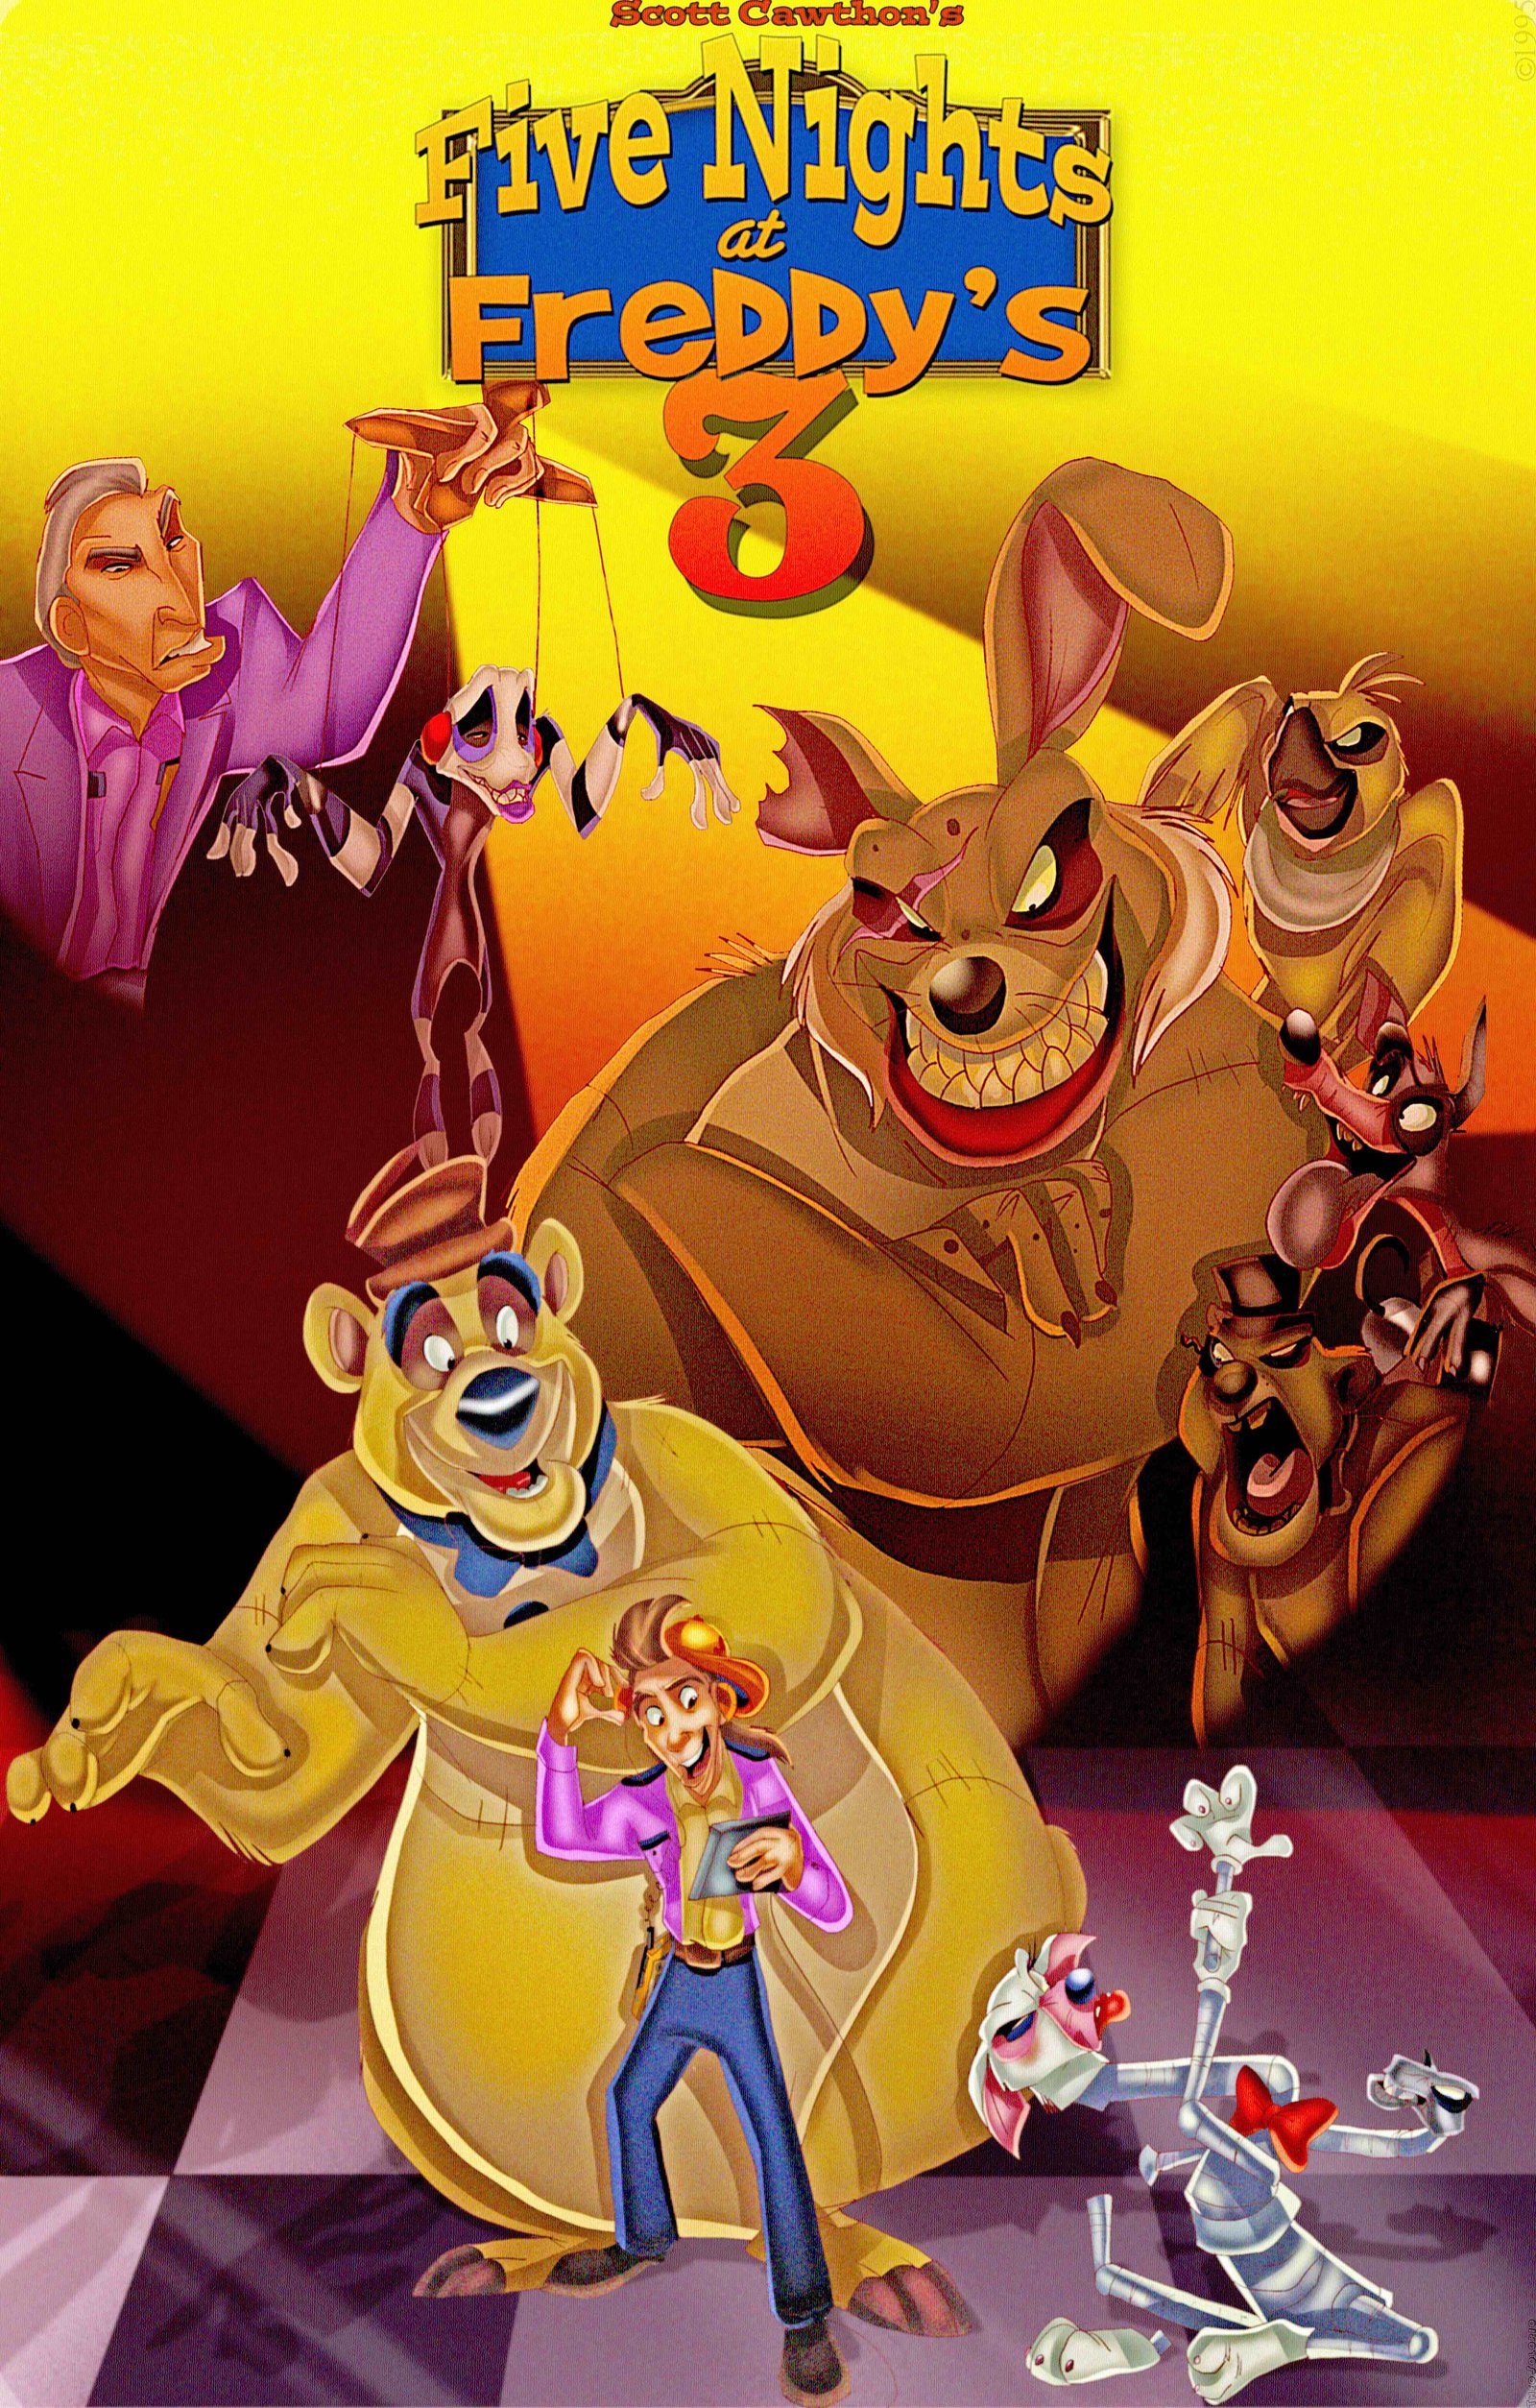 Gallery Five Nights At Freddy’s Goes Disney The Arcade